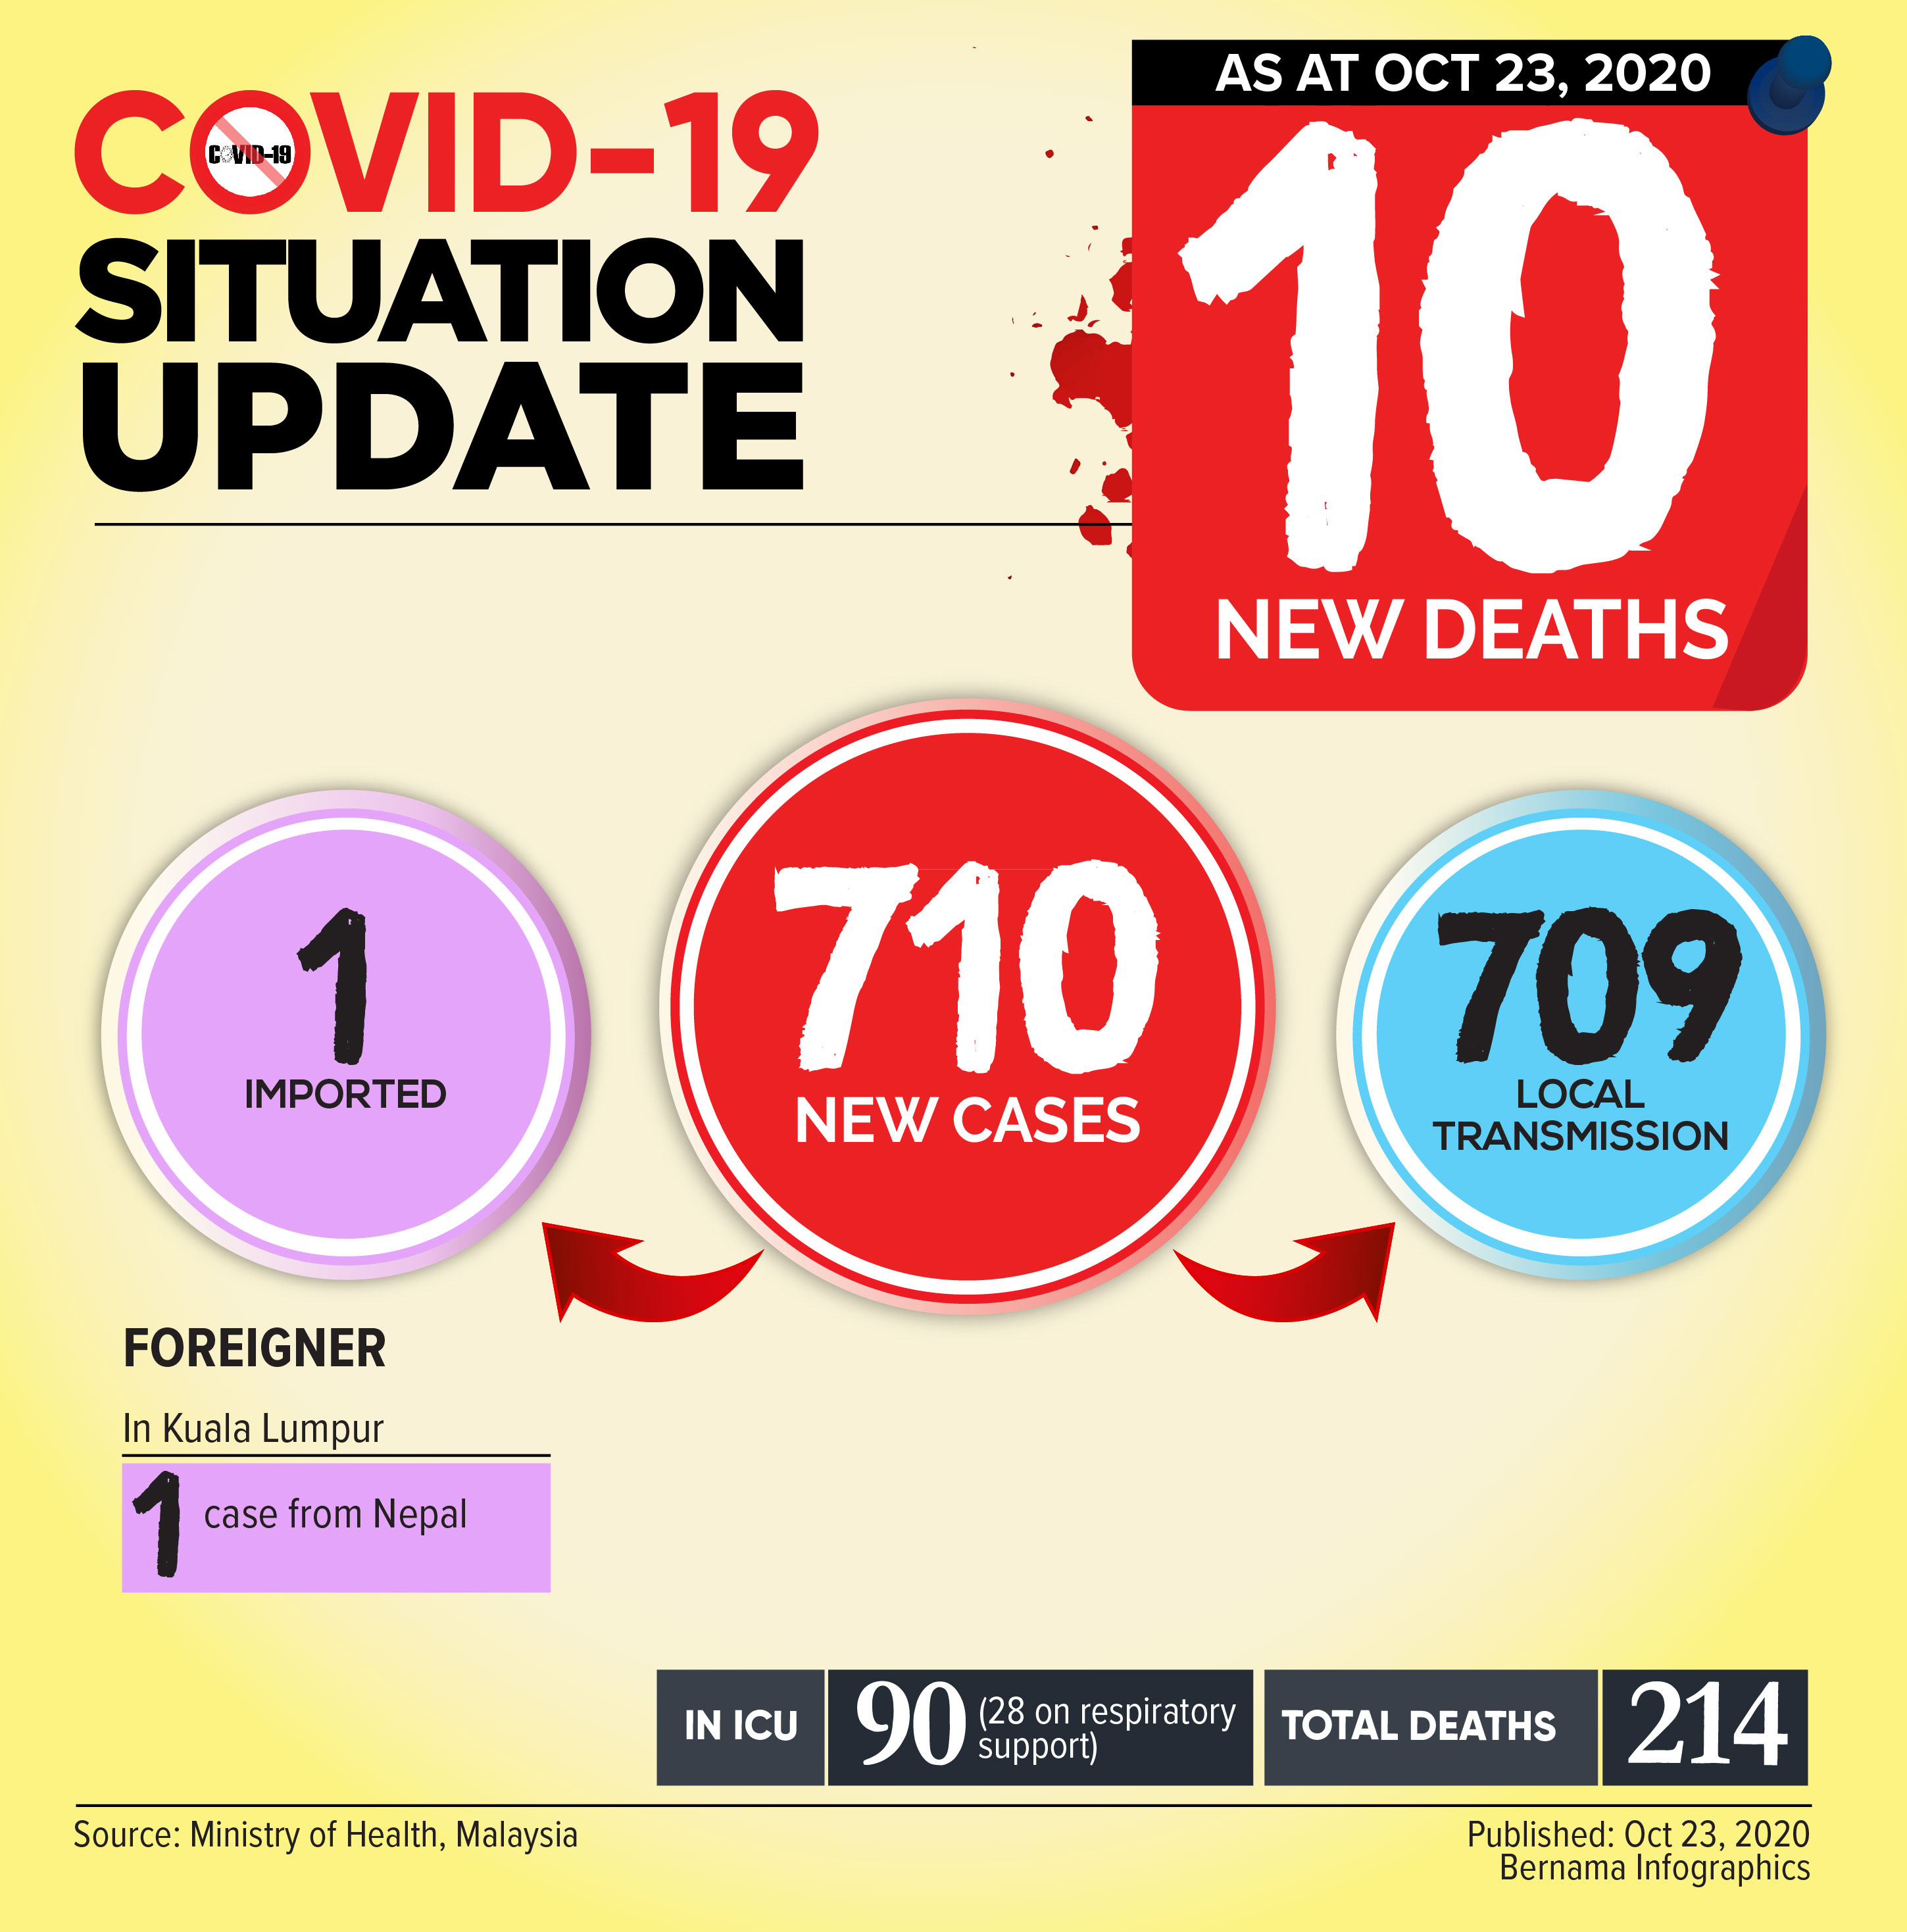 Malaysia sees 710 new COVID-19 cases, 10 deaths